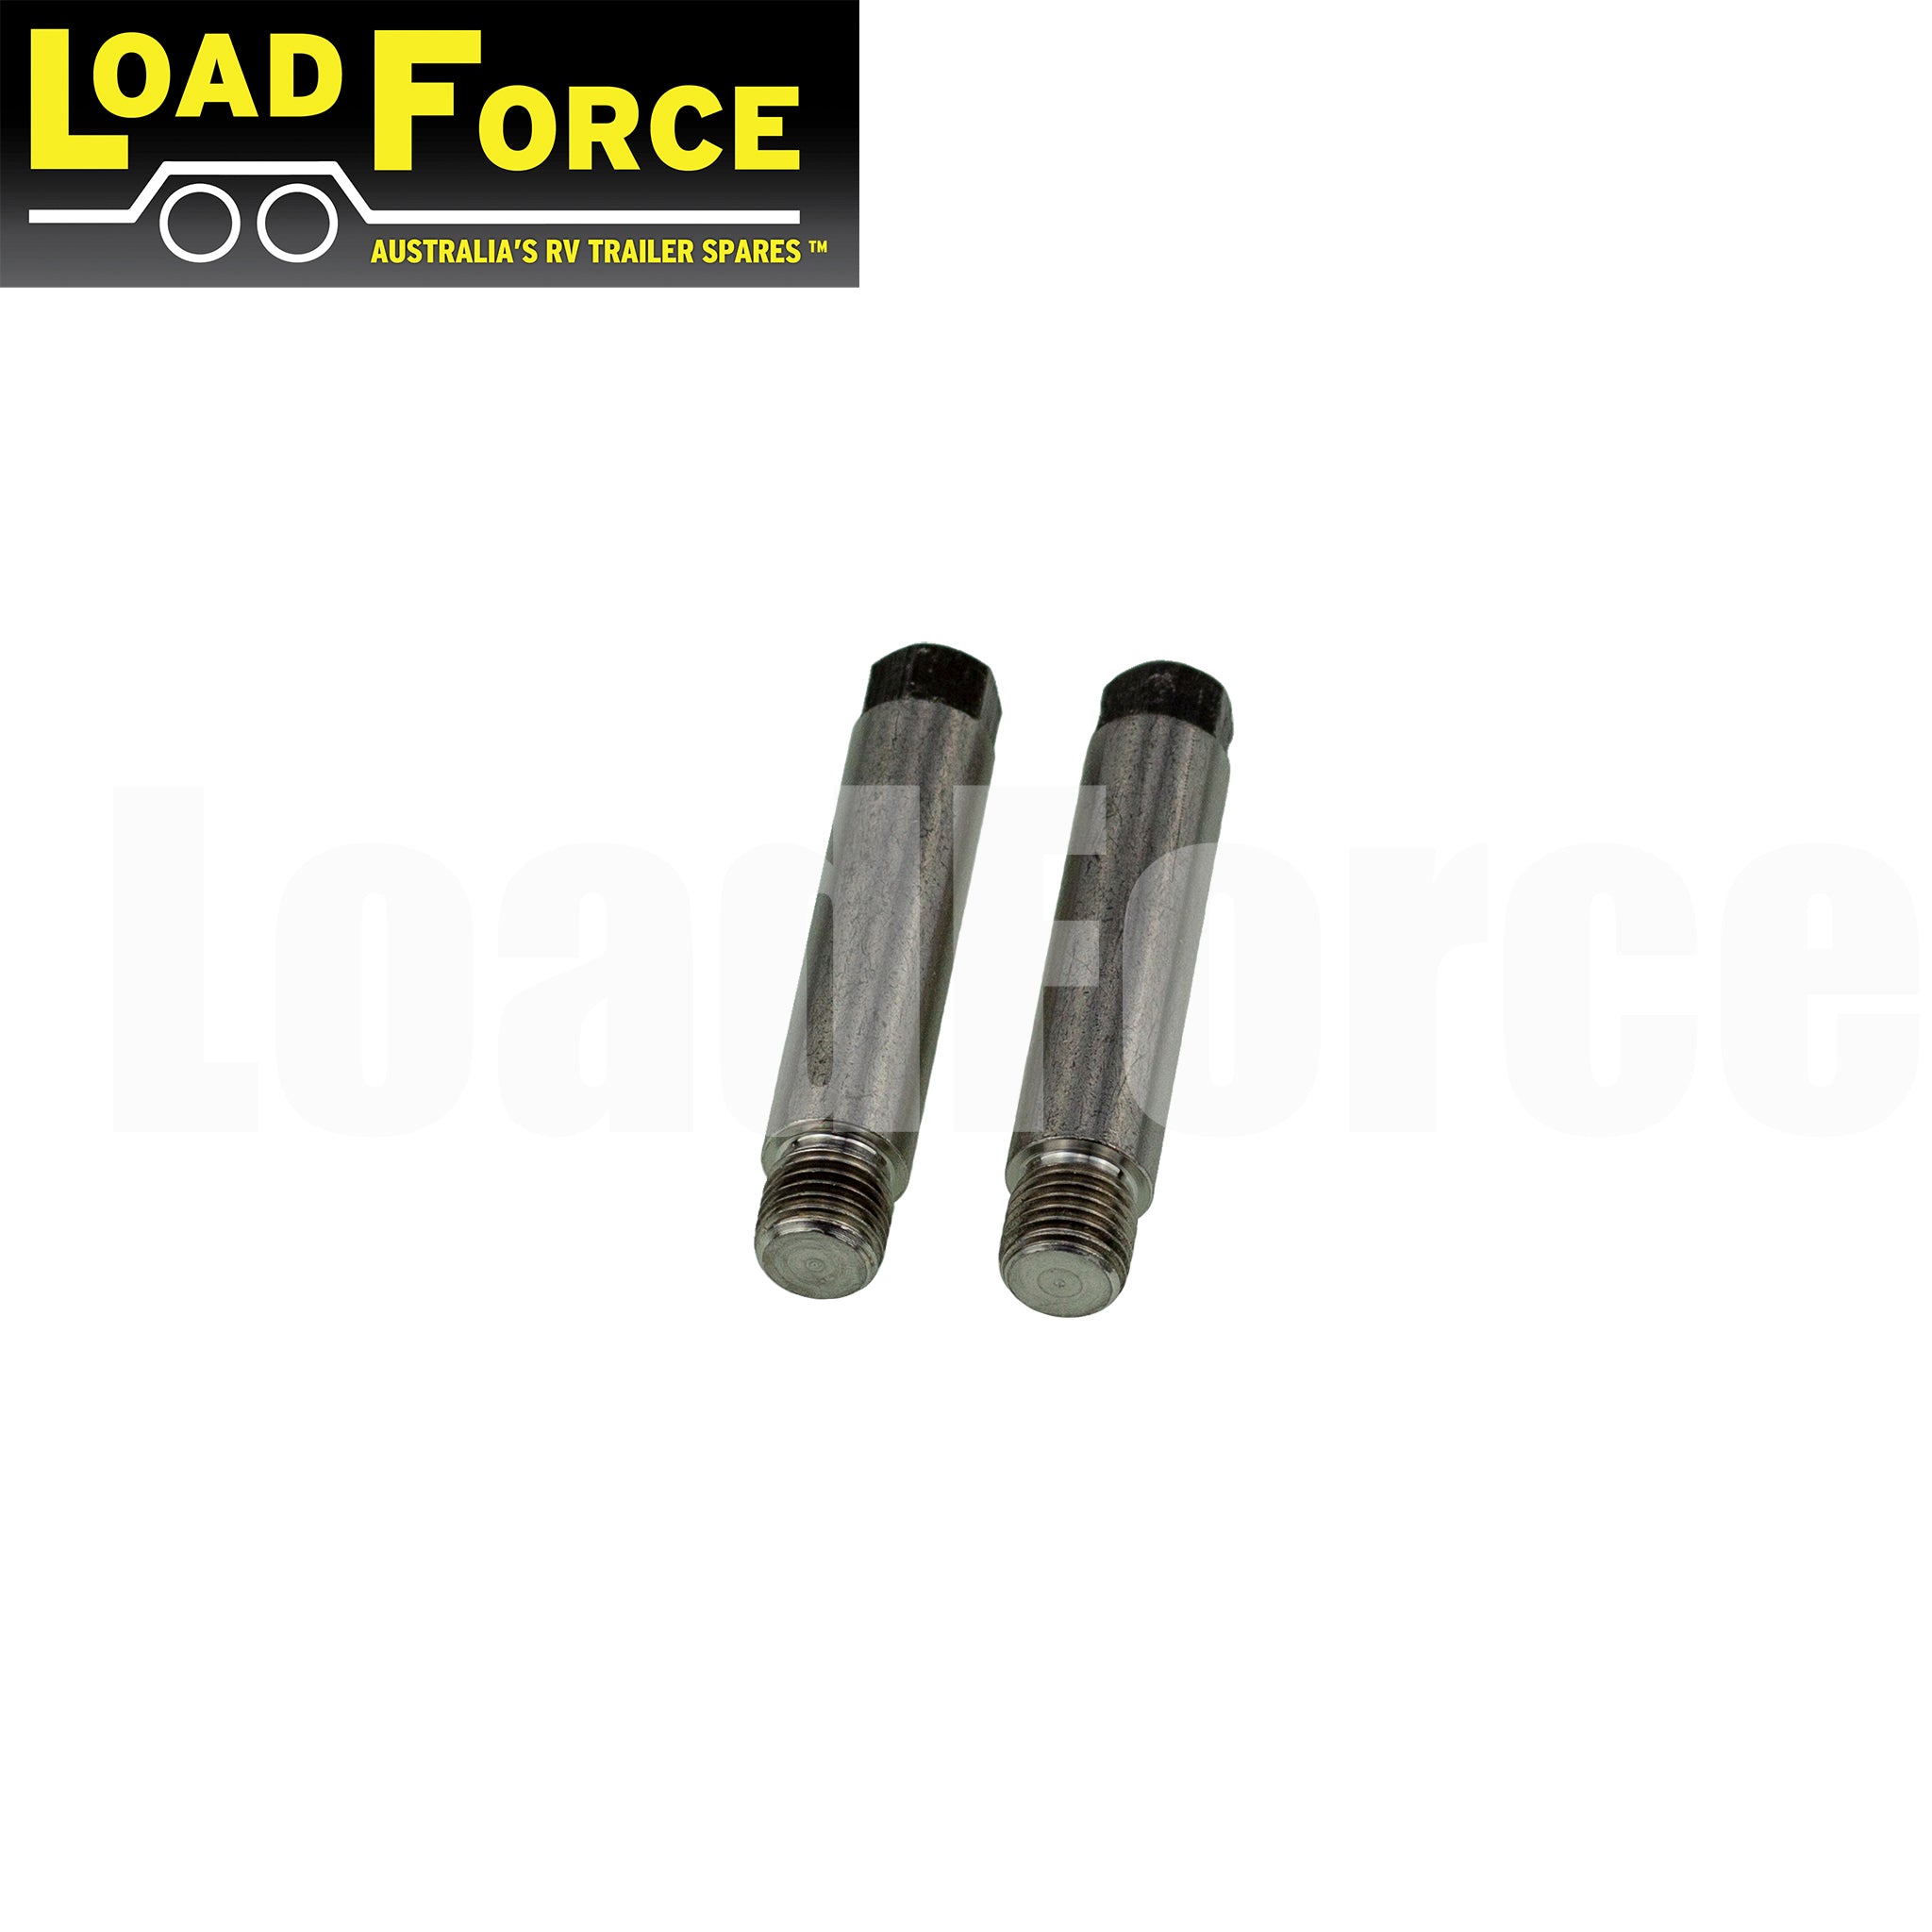 Slide pin bolts pair for Tie Down Engineering 46304 caliper